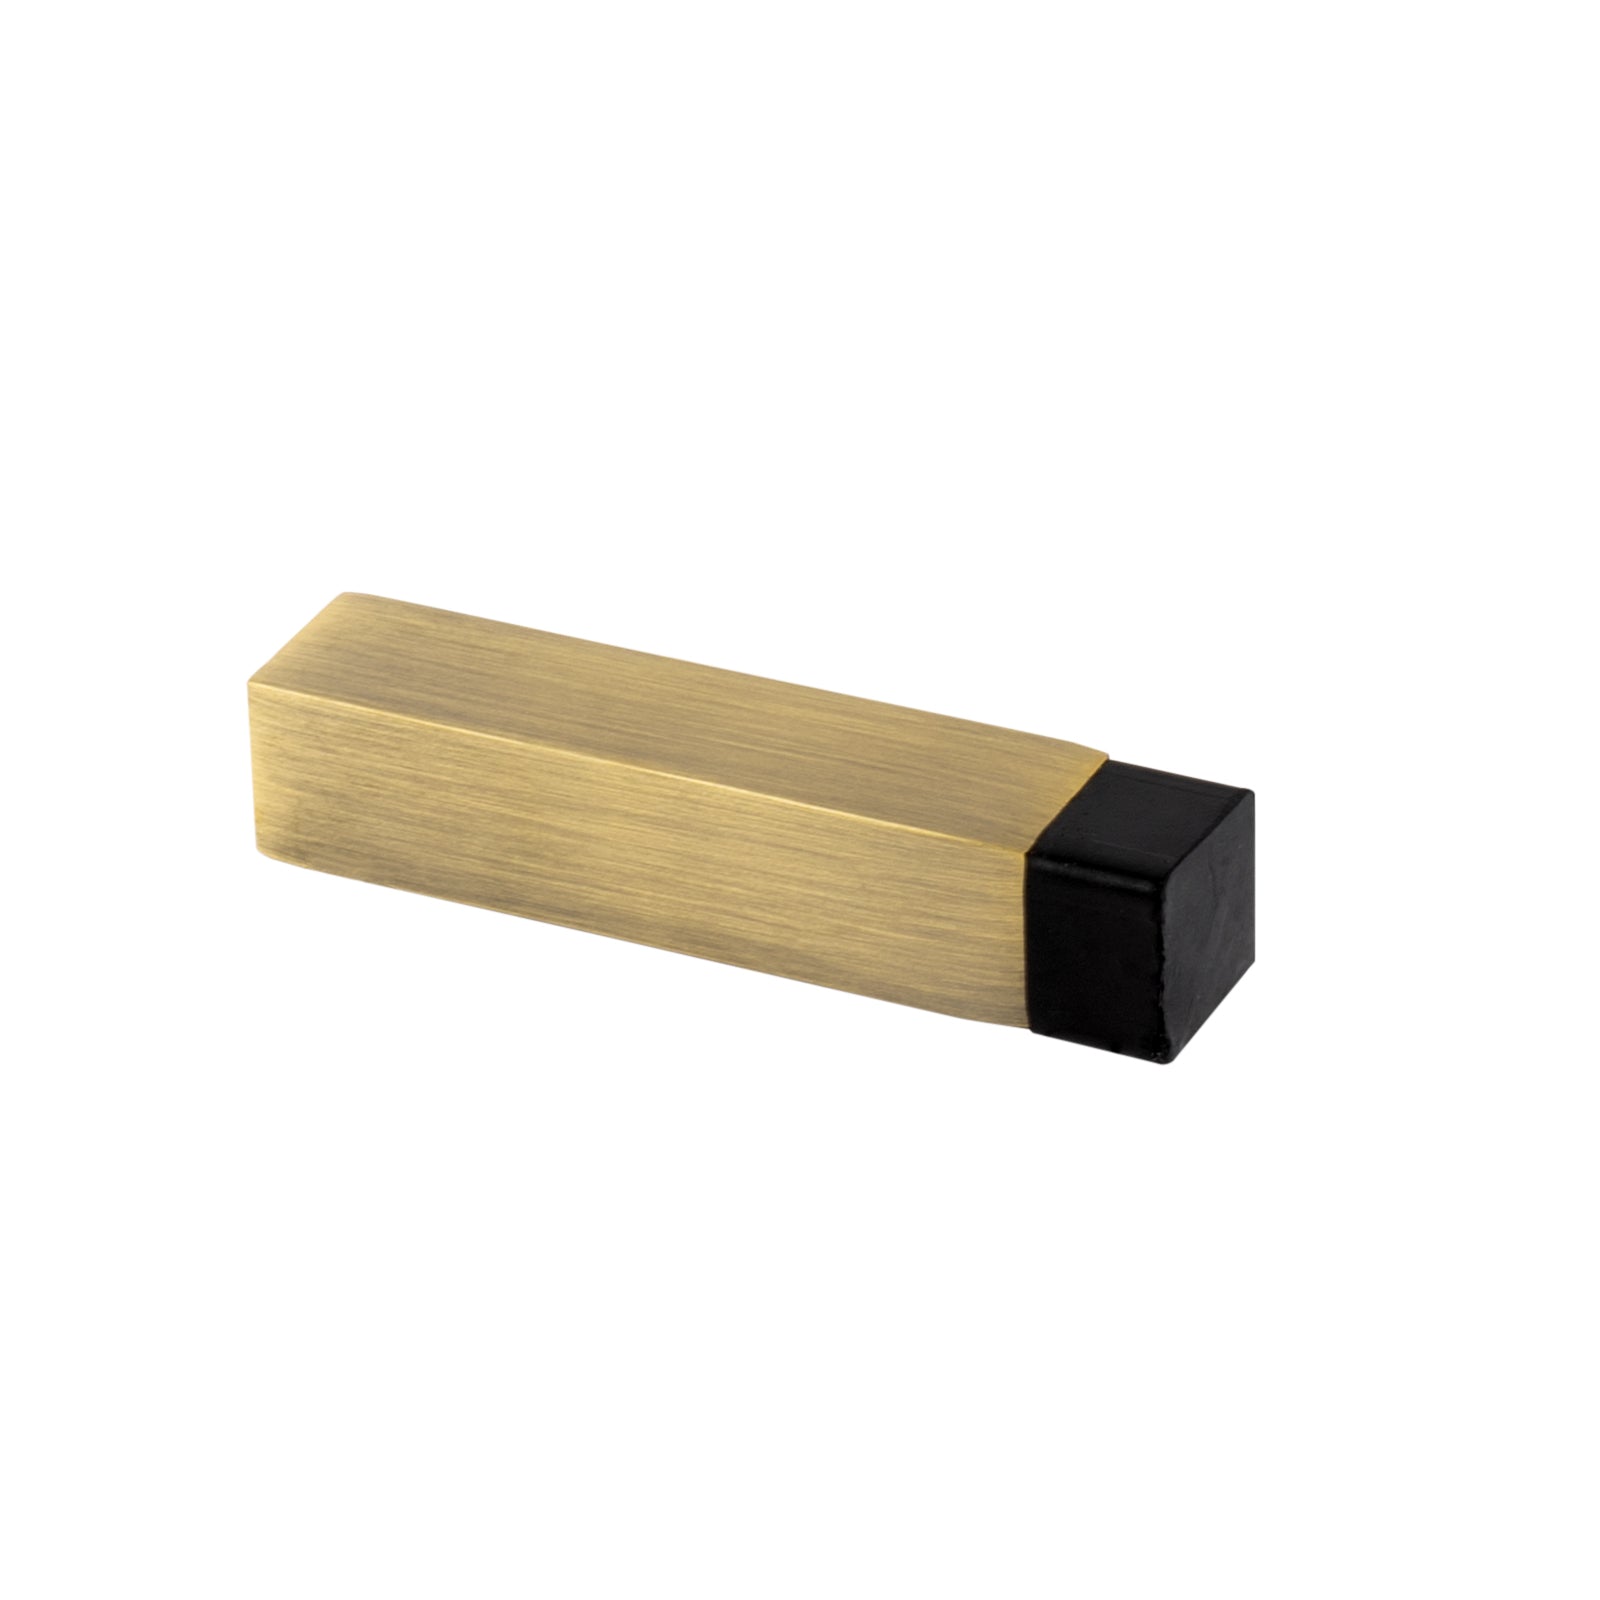 aged brass square wall mounted door stop SHOW